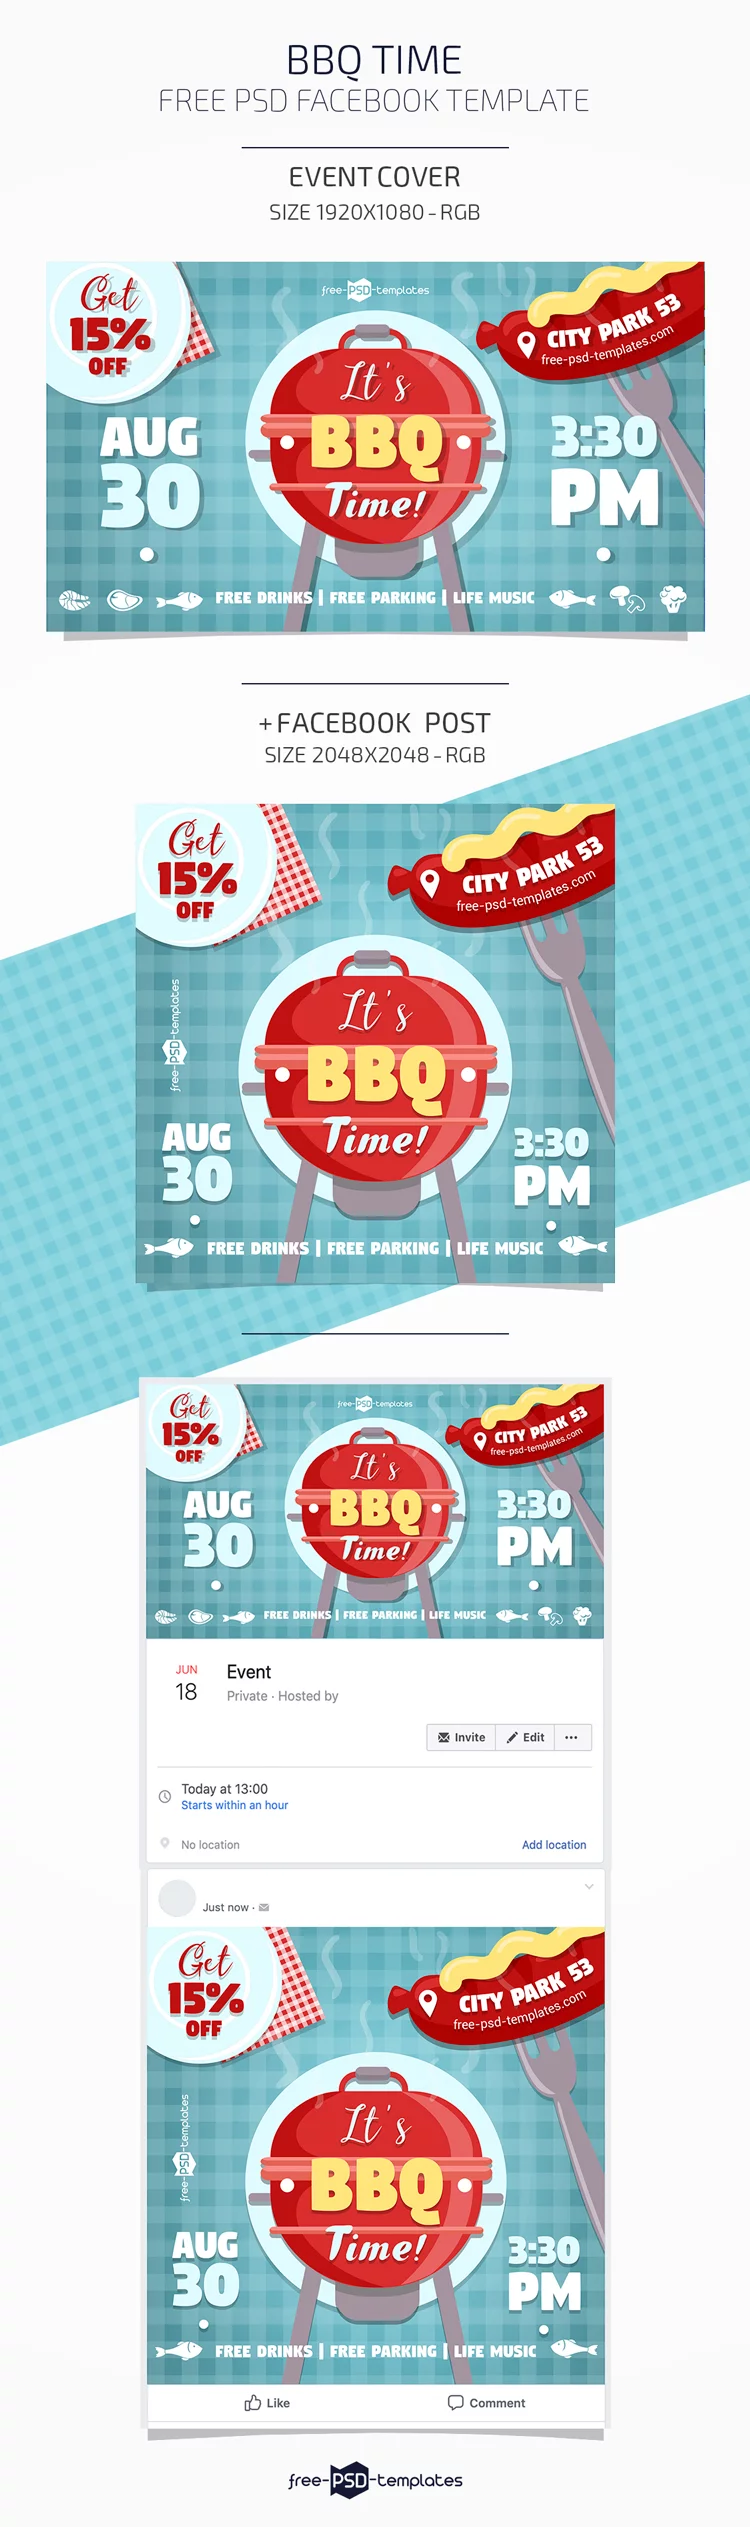 Free BBQ Facebook Event Page Template